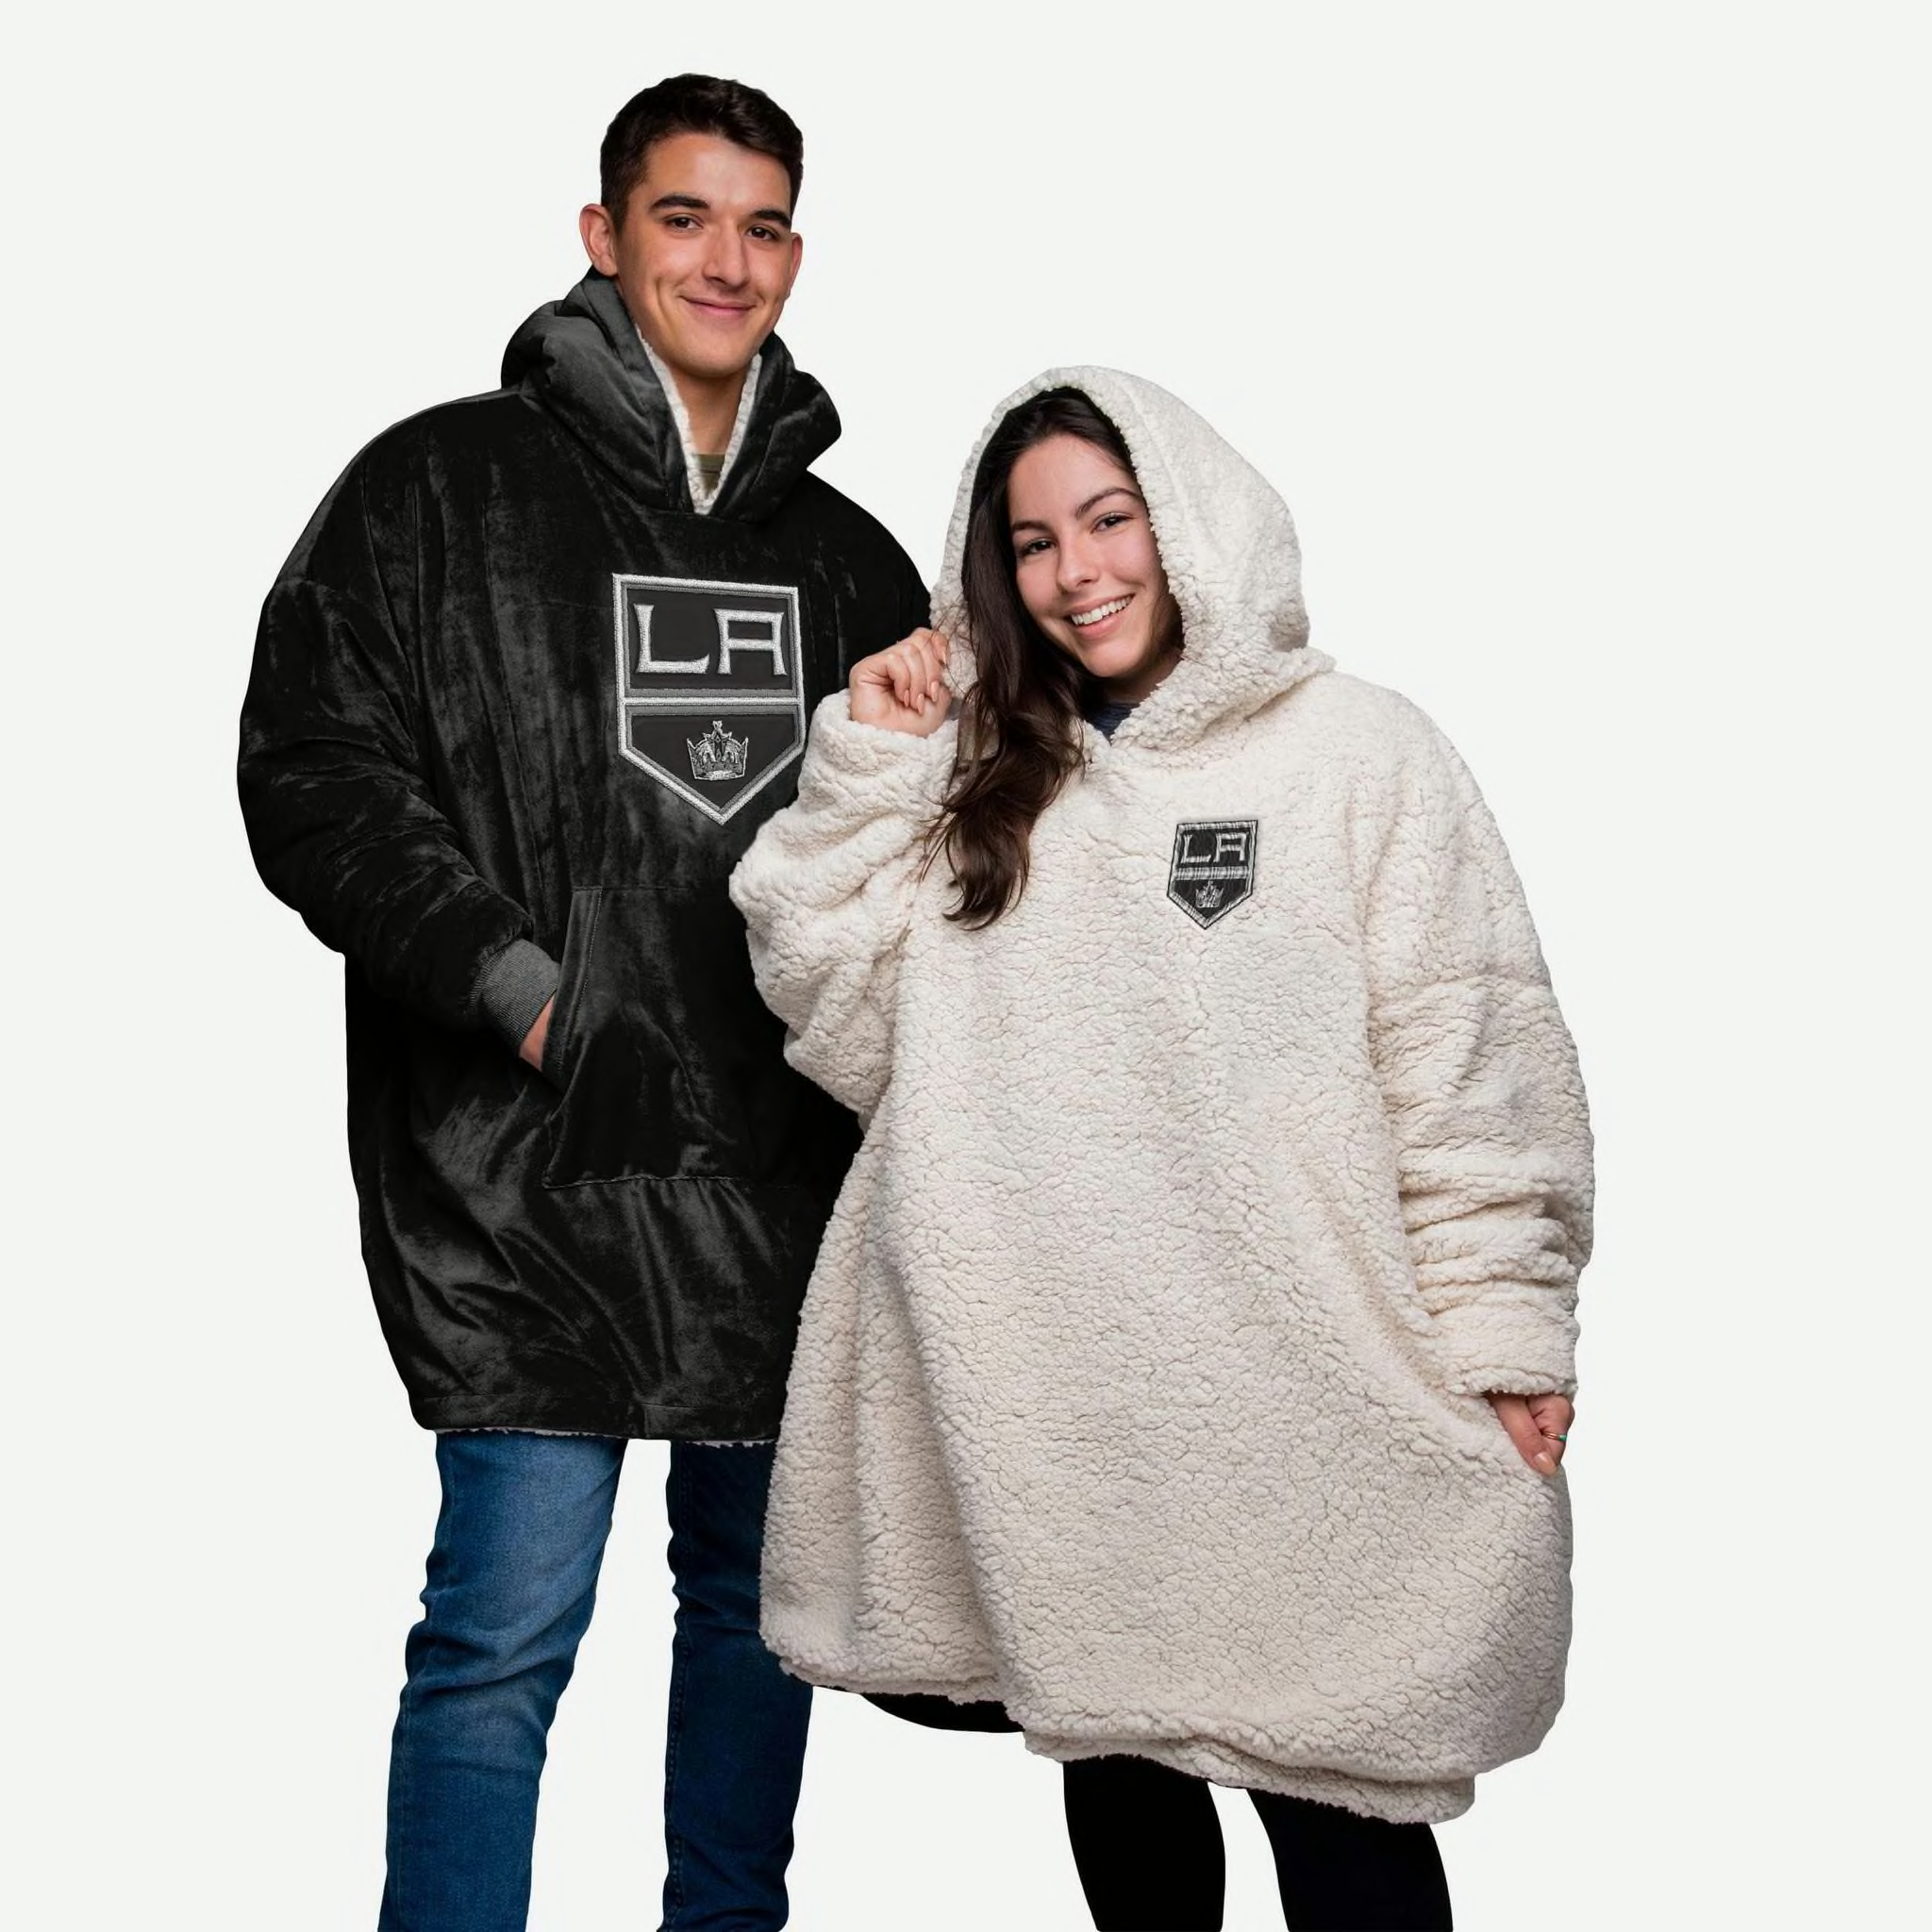 Los Angeles Kings 2020 Holiday Gift Guide